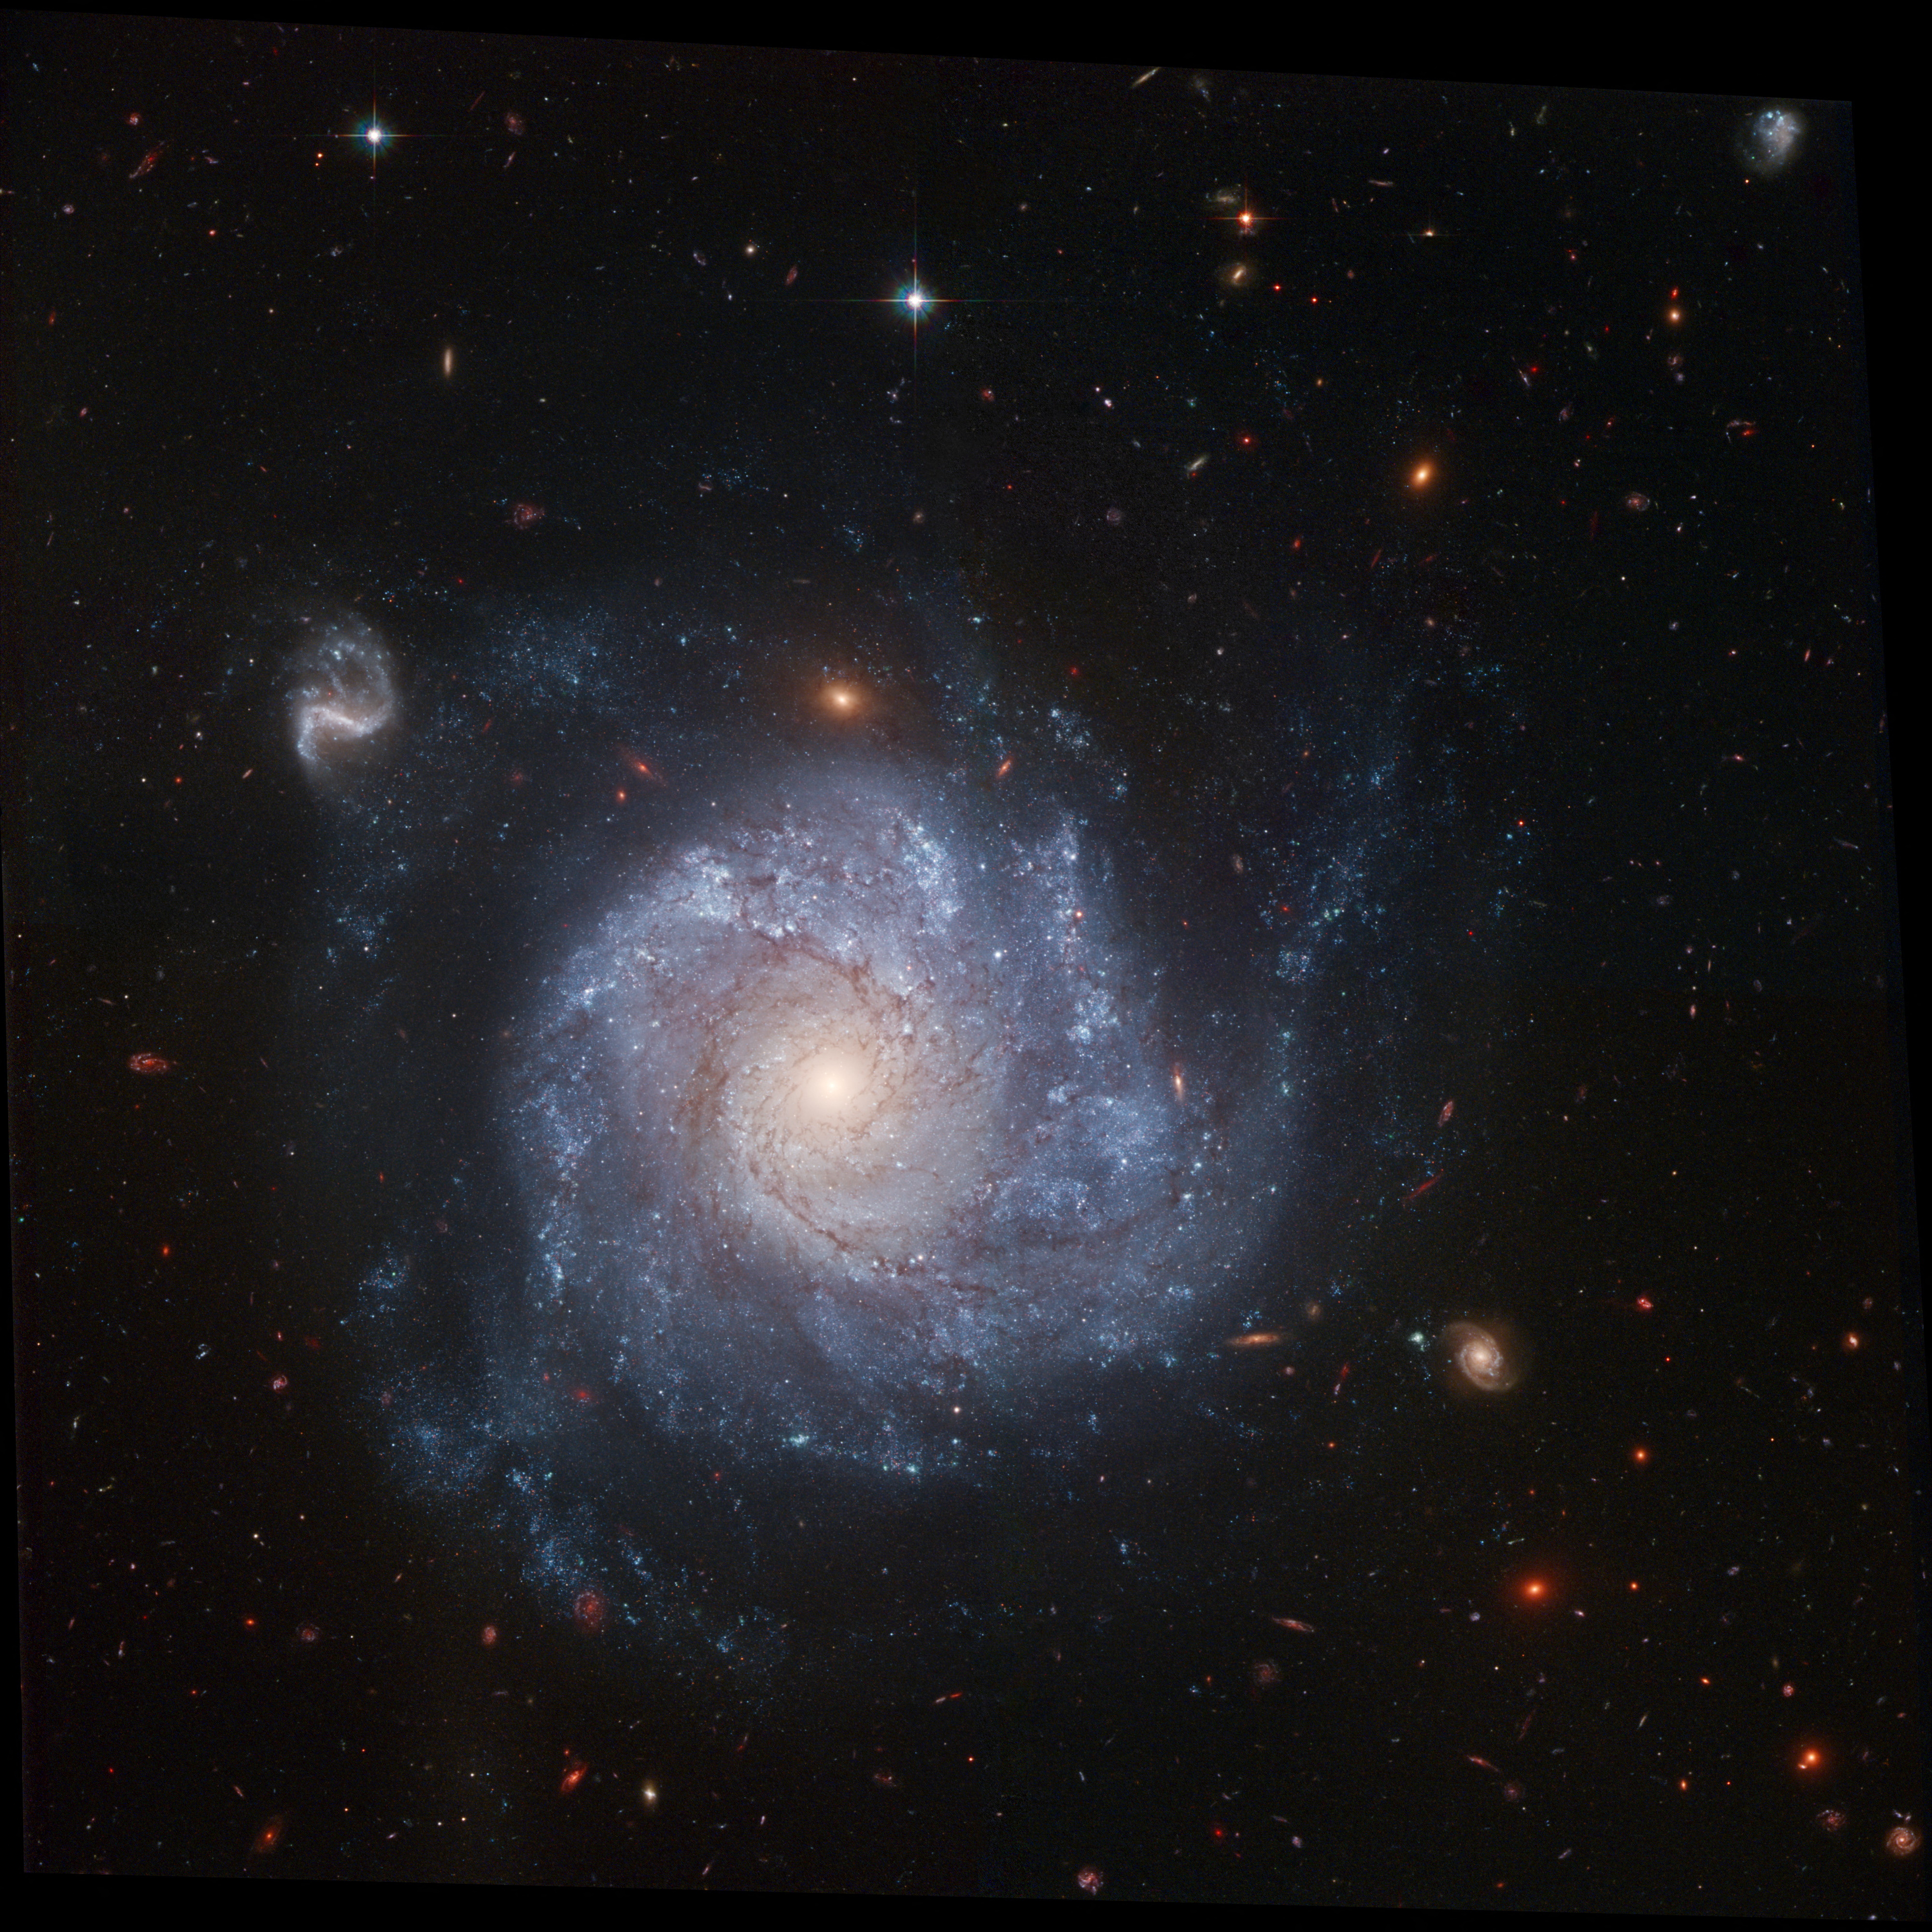 2005 image of the spiral galaxy NGC 1309